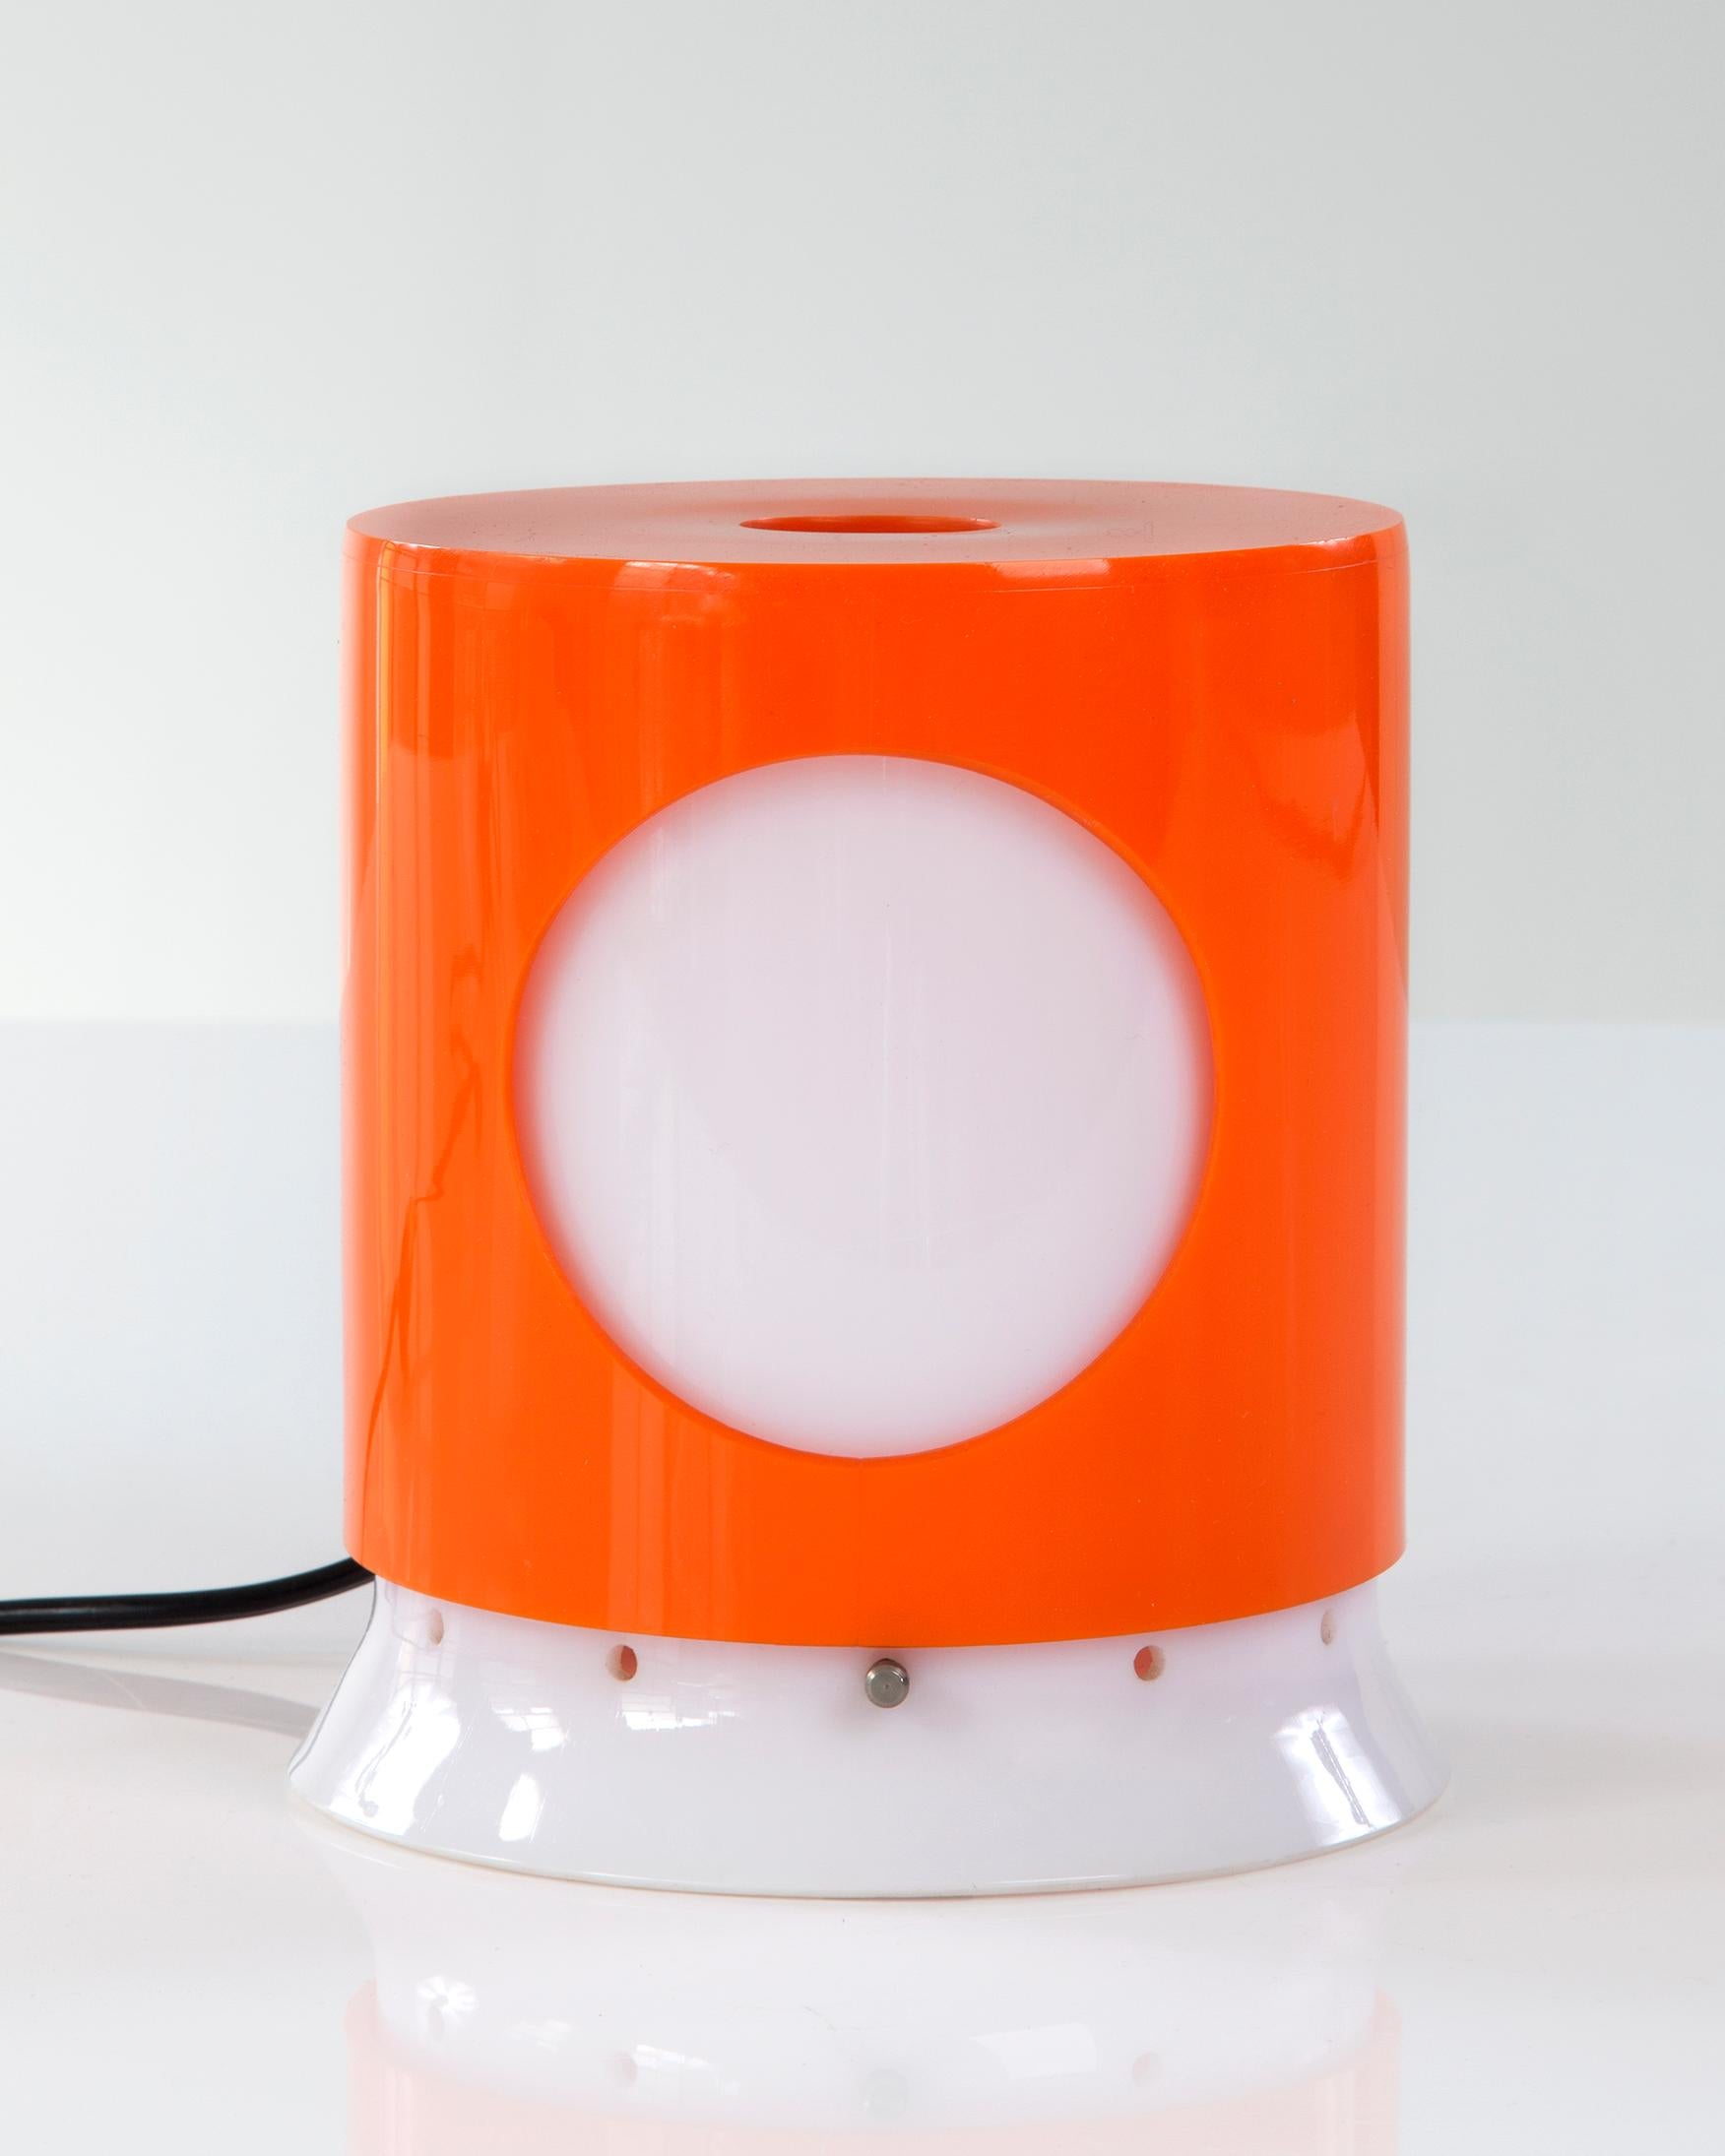 Table lamp in orange and white plastic. Designed by Joe Colombo, produced by Kartell, Italy, 1965.